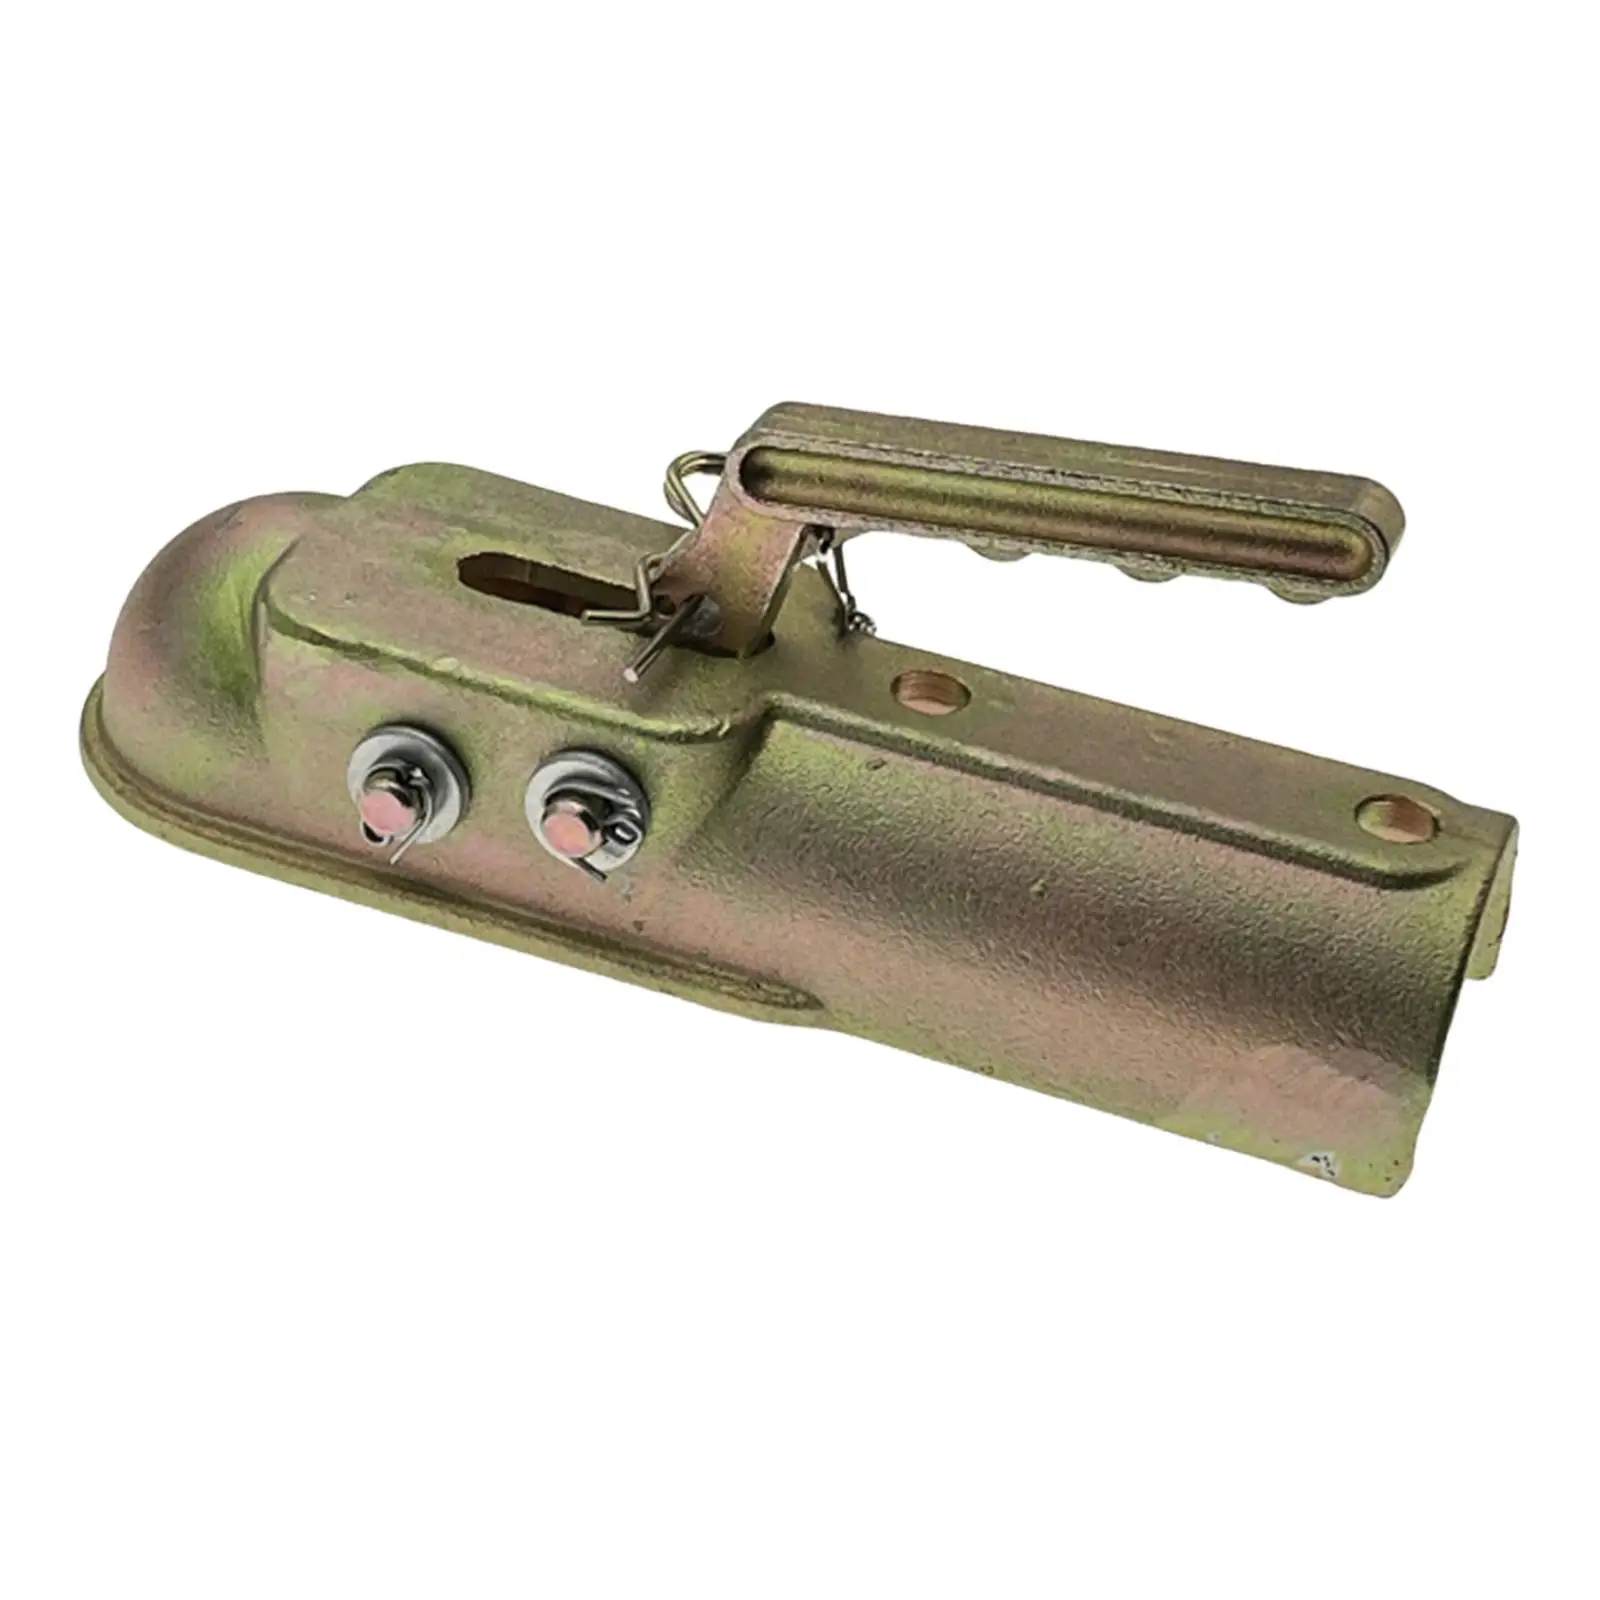 Straight Trailer Coupler Accessory for Camper Convenient Installation